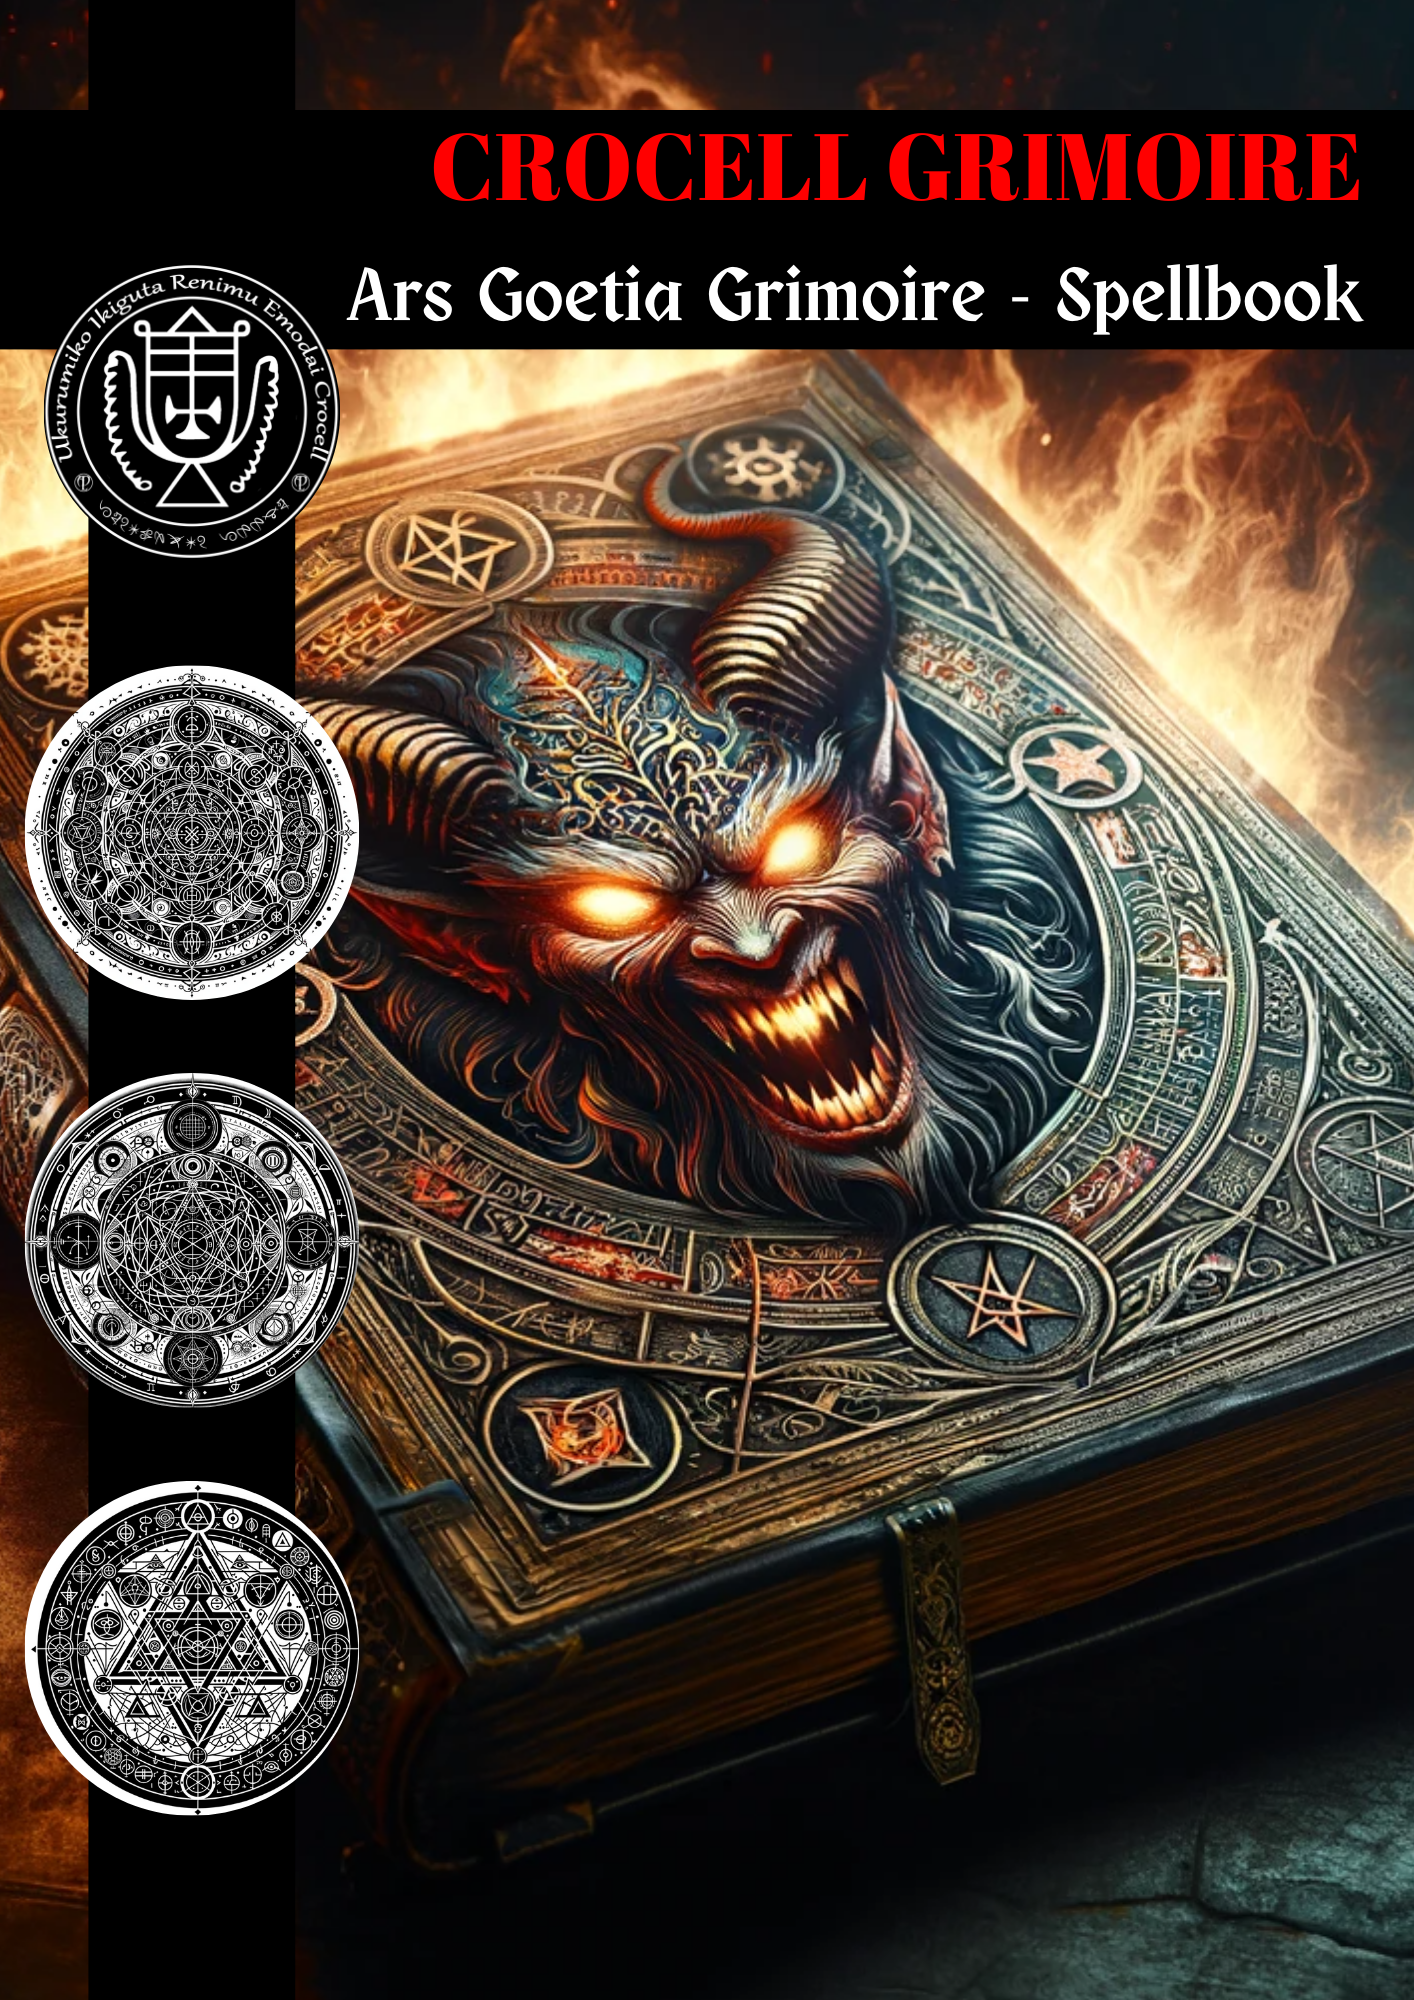 Grimoire of Crocell Spells & Rituals to Temper Harsh Emotions and to Open Minds - Abraxas Amulets ® Magic ♾️ Talismans ♾️ Initiations